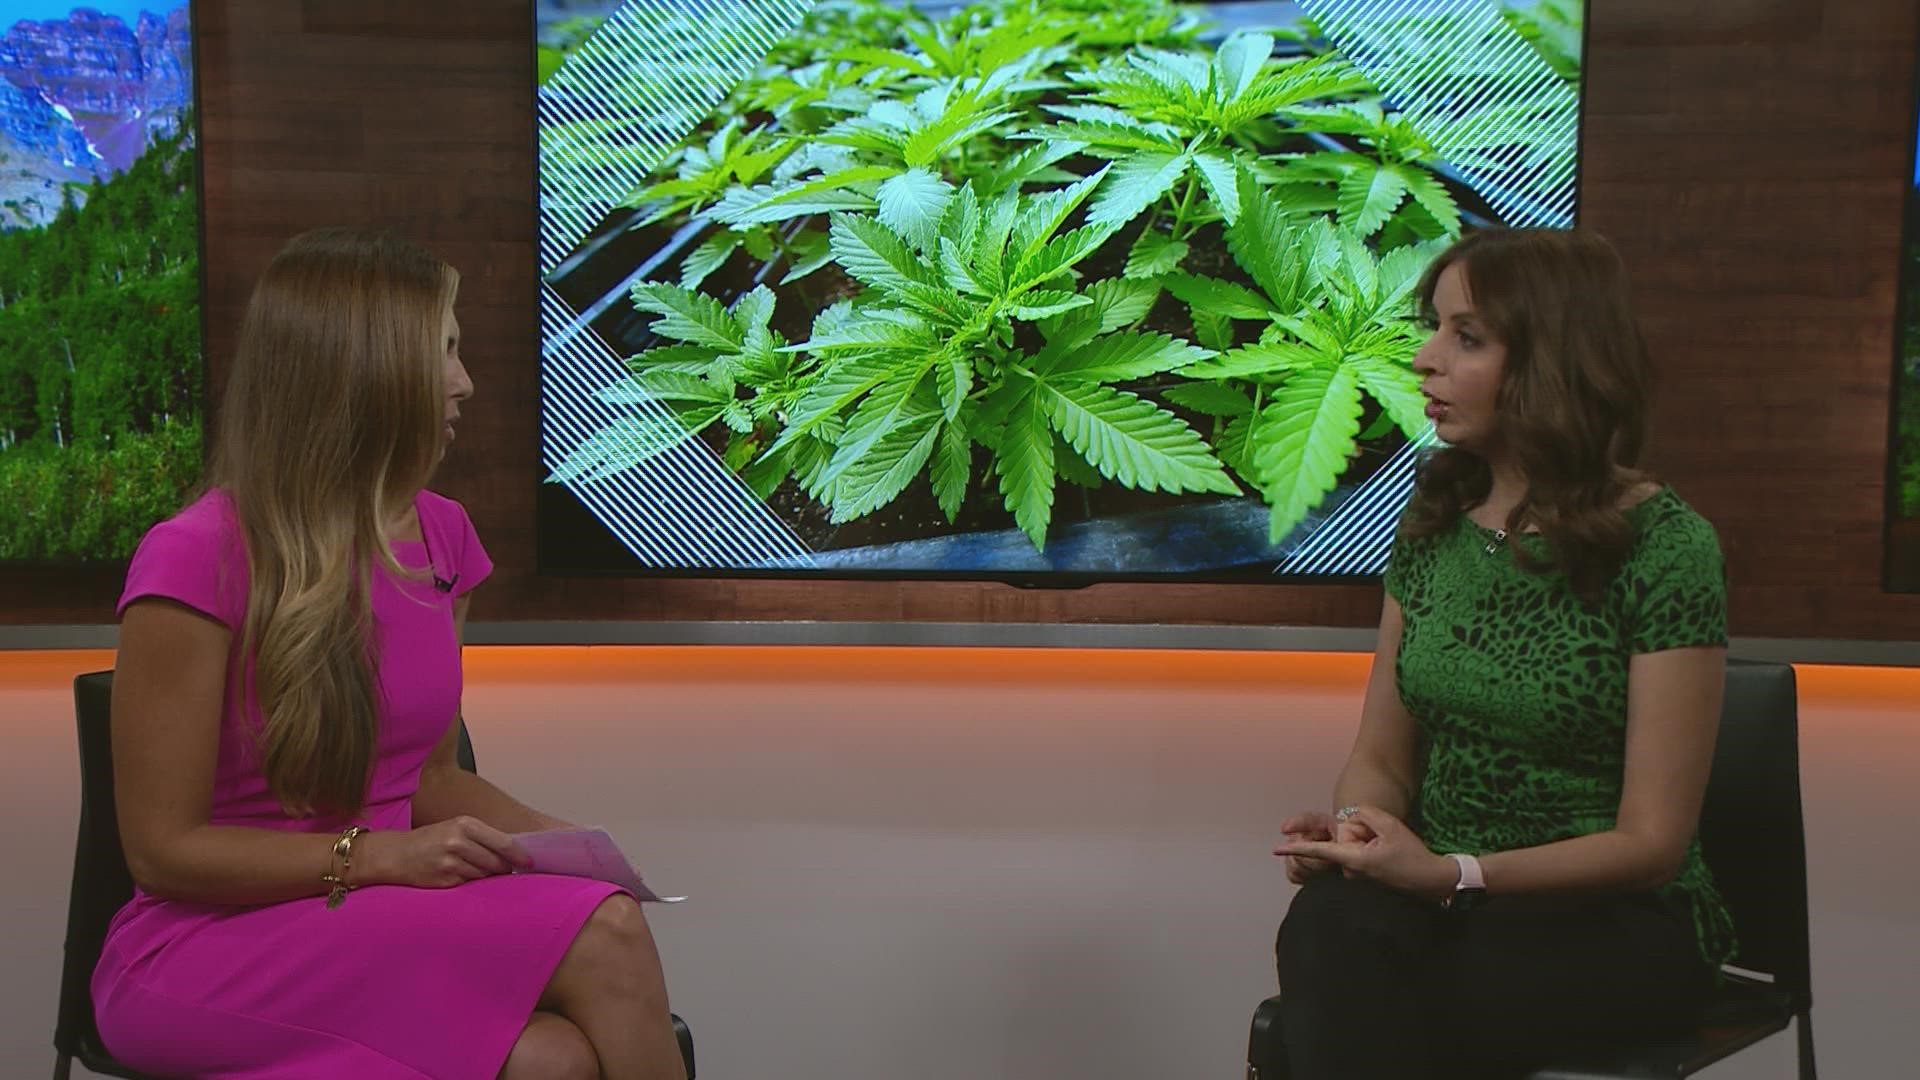 9NEWS Health Expert Dr. Payal Kohli goes over new research looking into the potential impacts of using cannabis while pregnant.